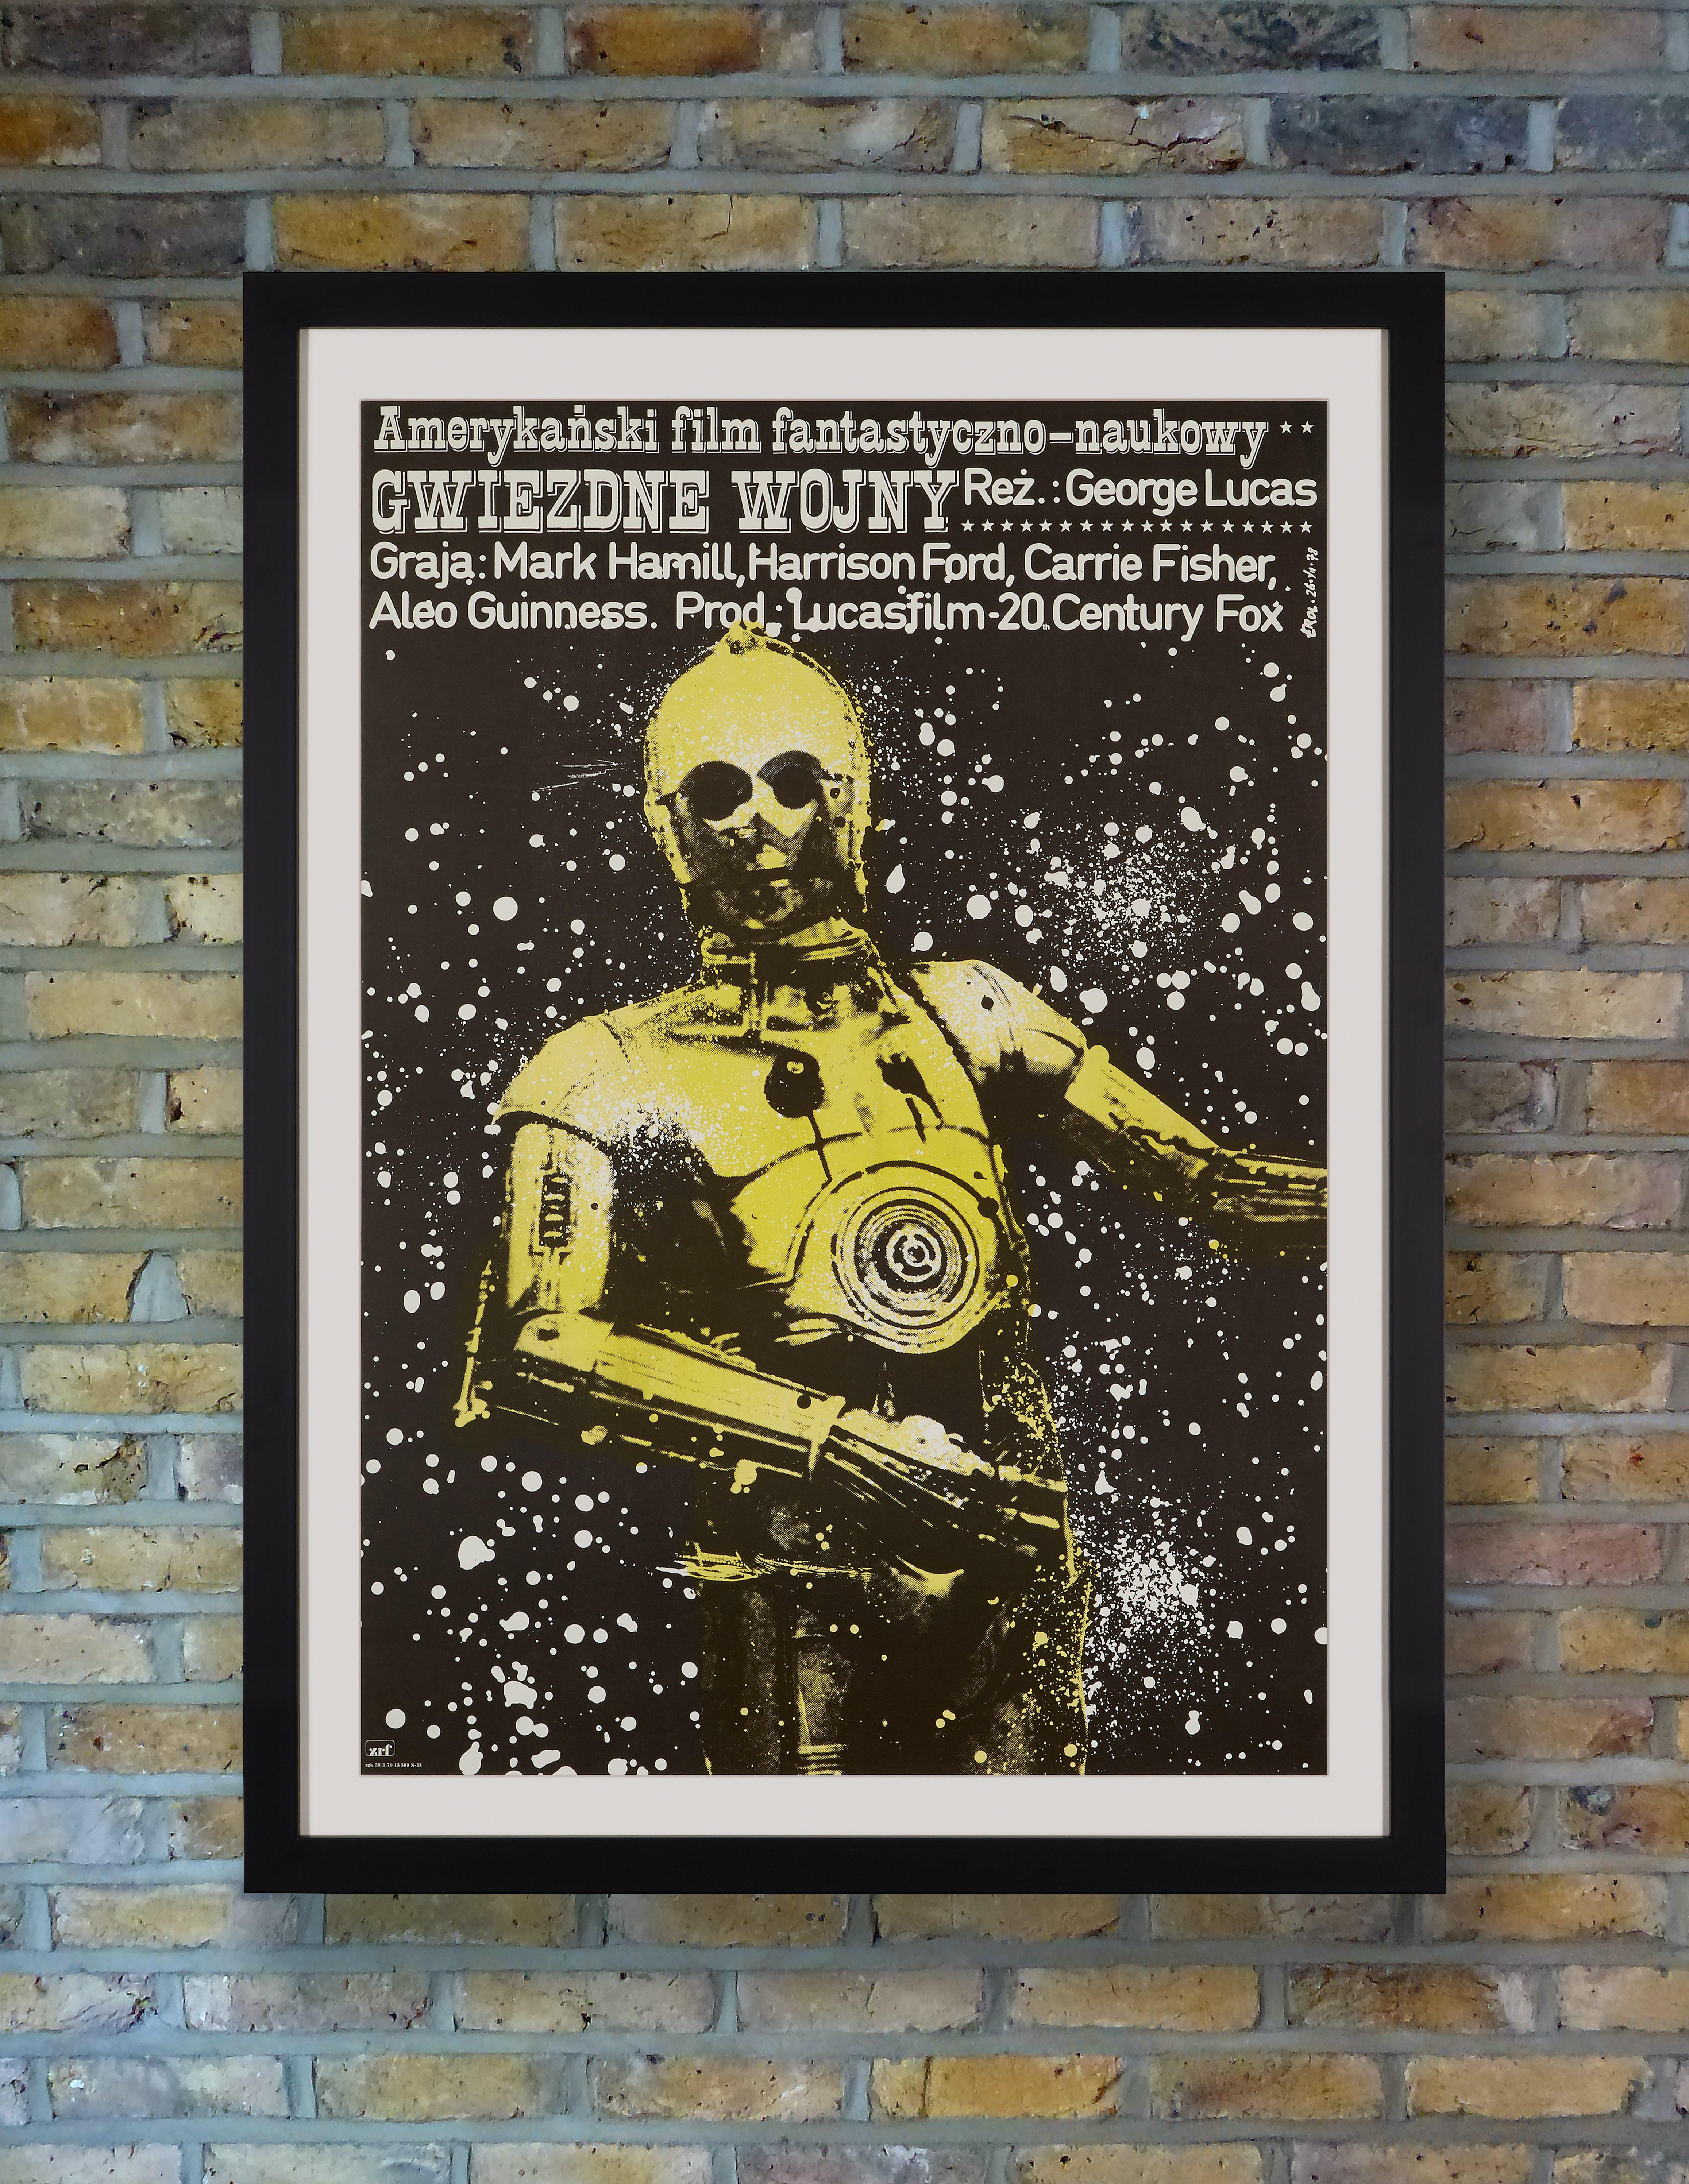 Jakob Erol's extraordinary design for the first release of Star Wars in Poland in 1979 focuses on a haunting image of C-3P0 against a splattered galaxy. The title lettered in a western style font reflects the notion that Star Wars was a space